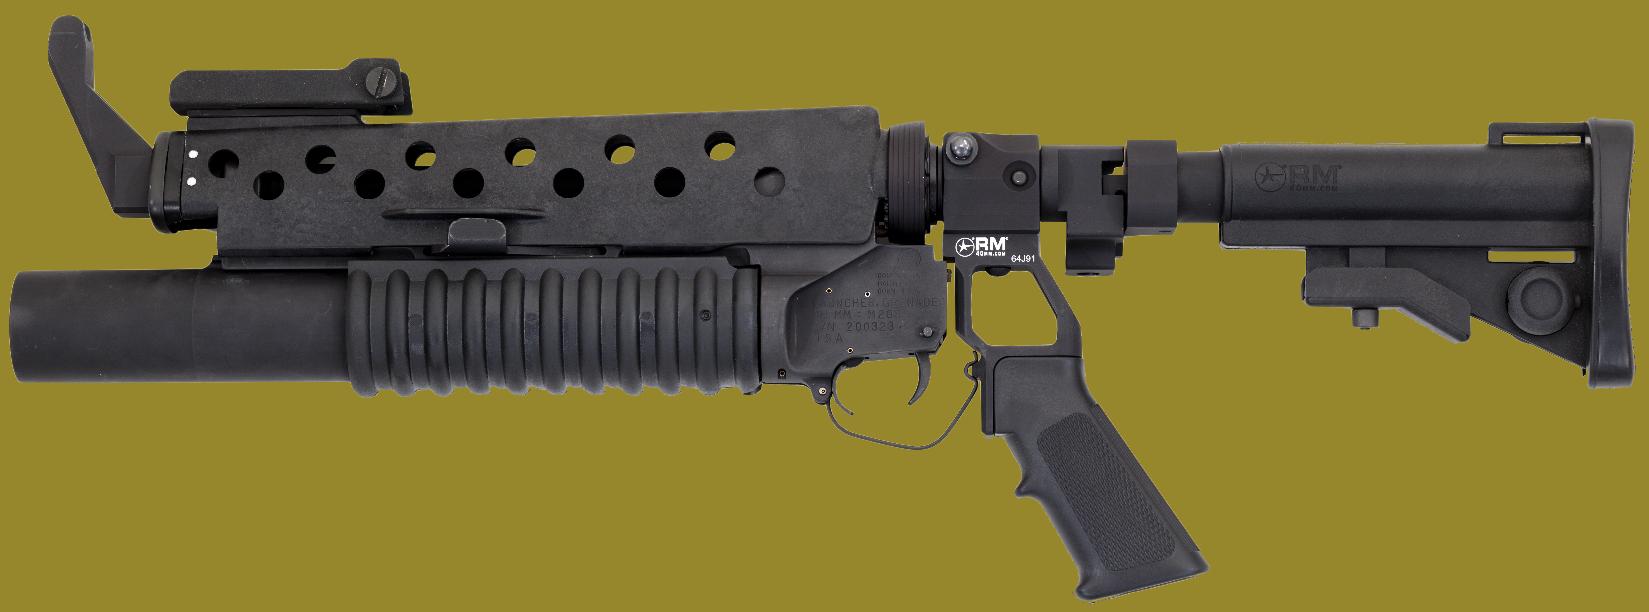 M203 40mm Grenade Launcher on Standalone Mount with stock extended.